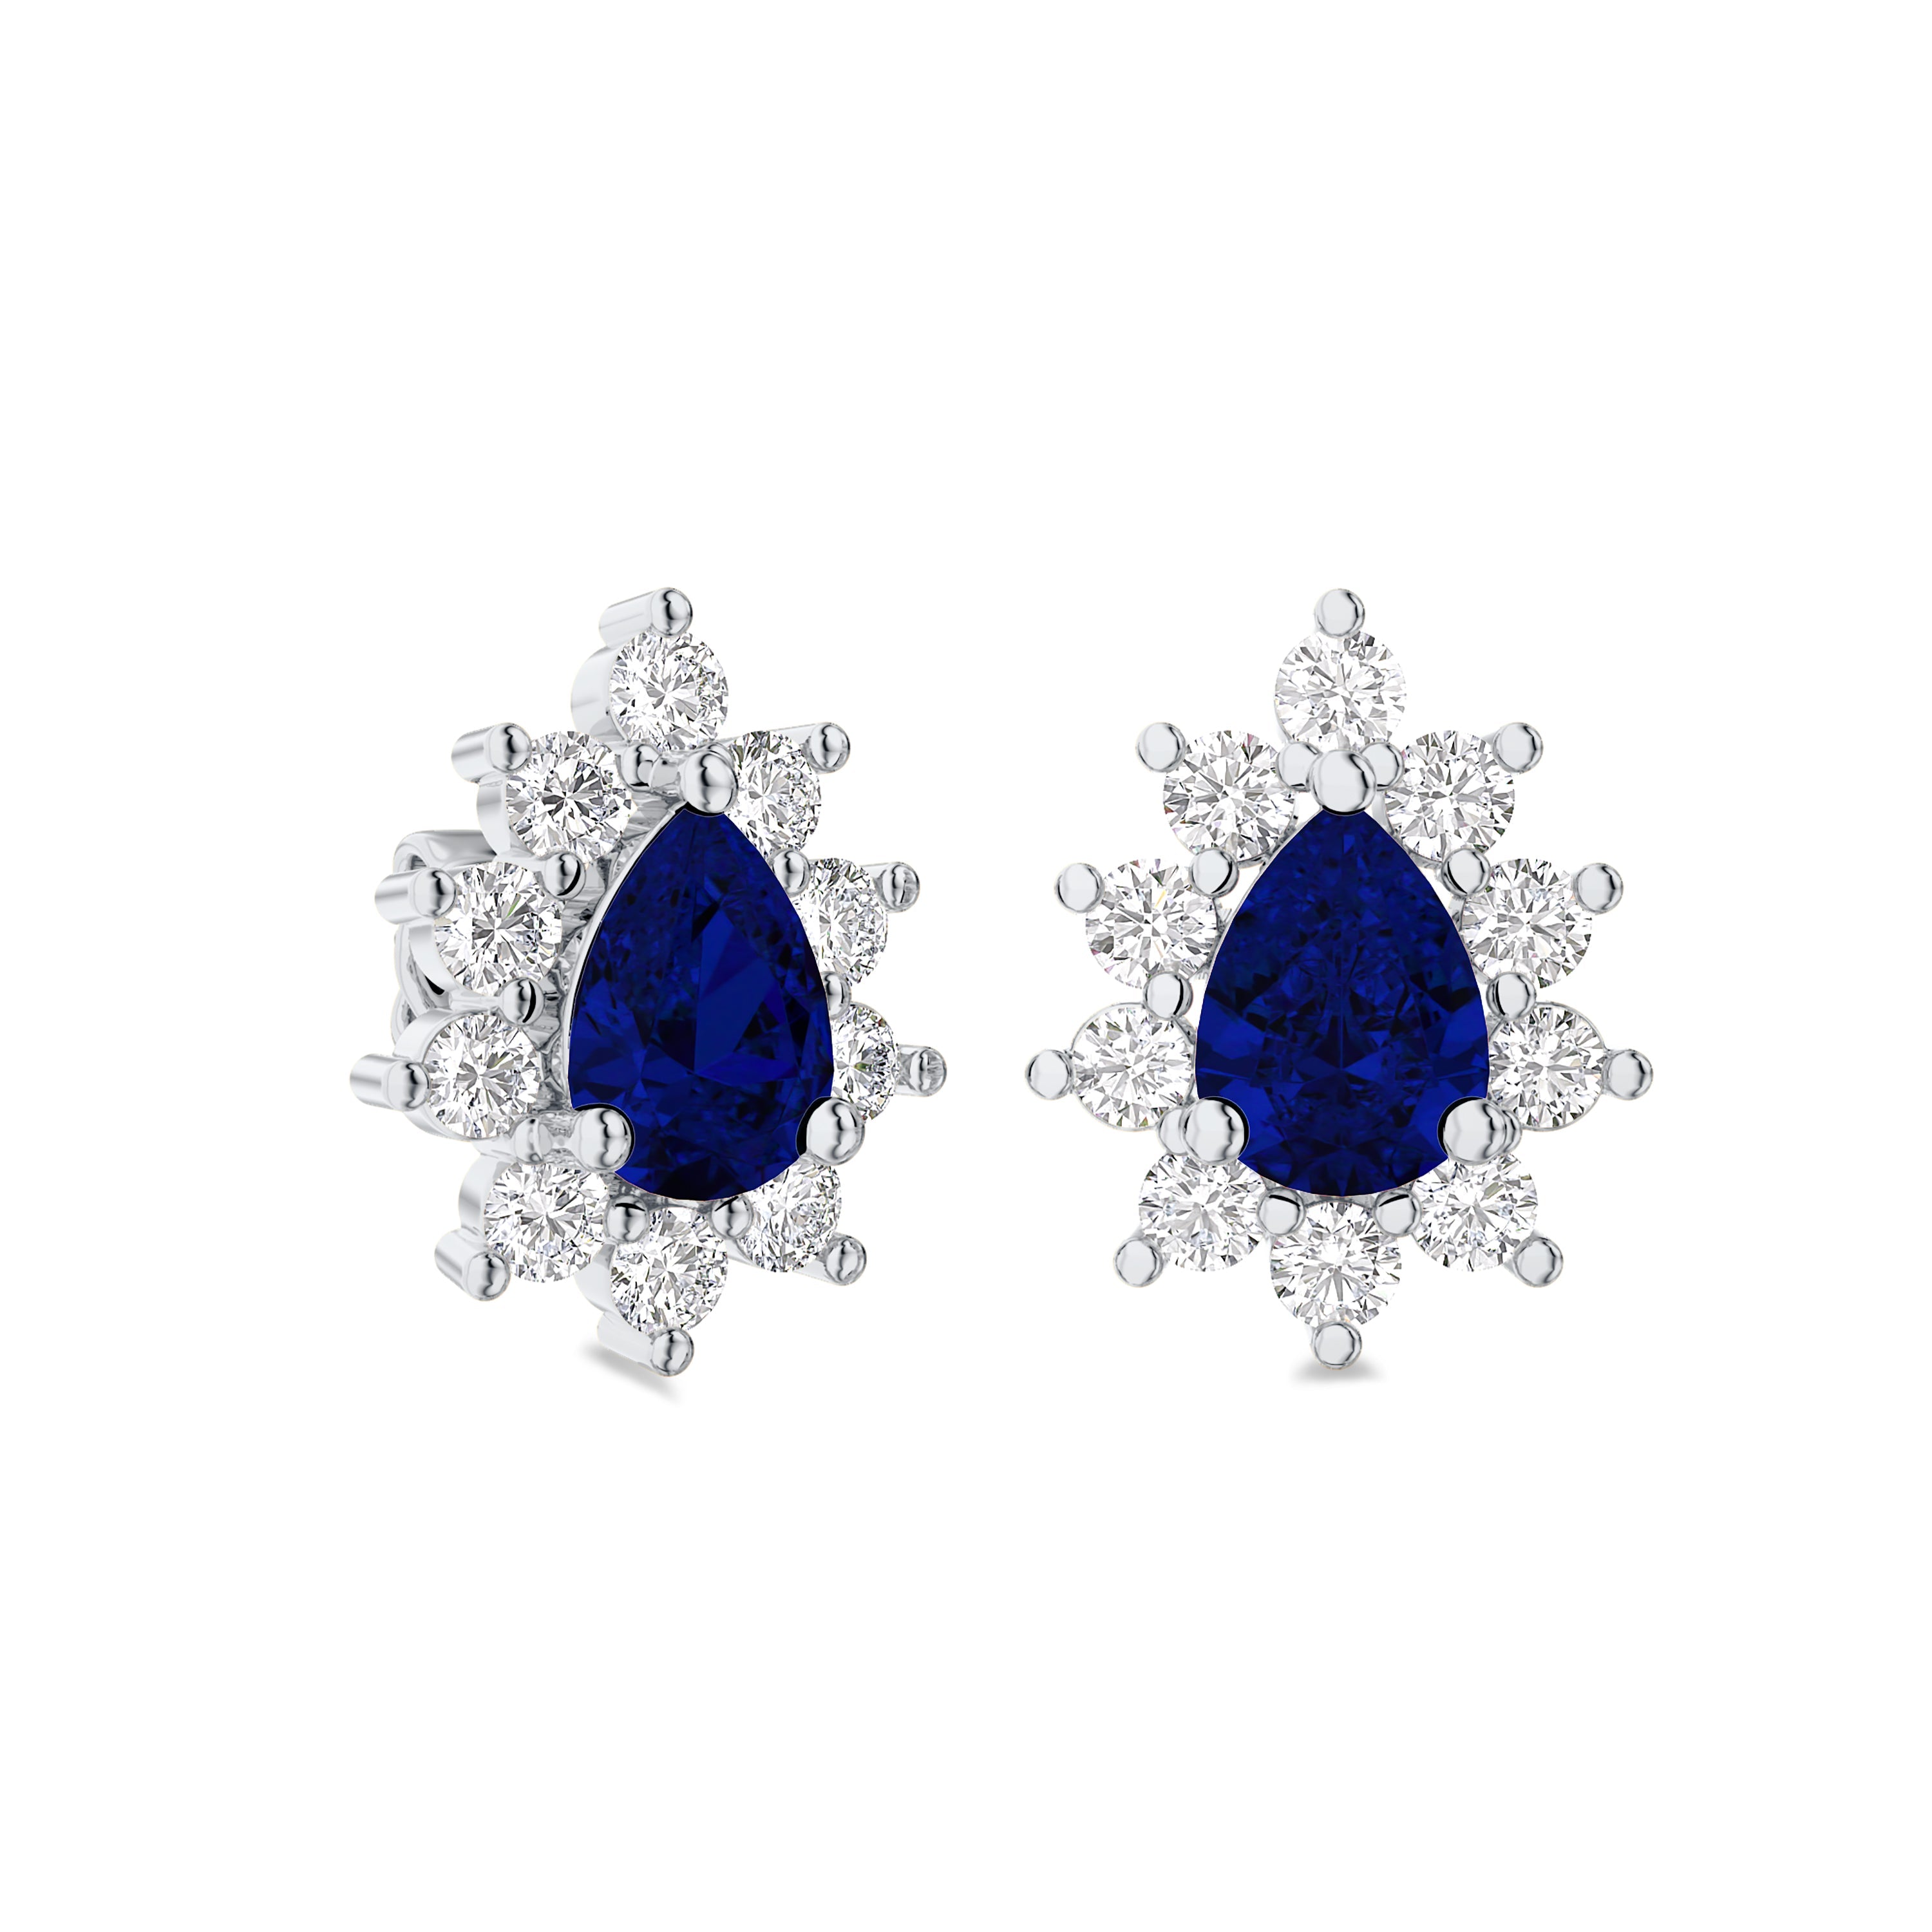 18K white gold earrings with 0.90 carat diamond and 1.48 carat sapphire, FG color and SI clarity